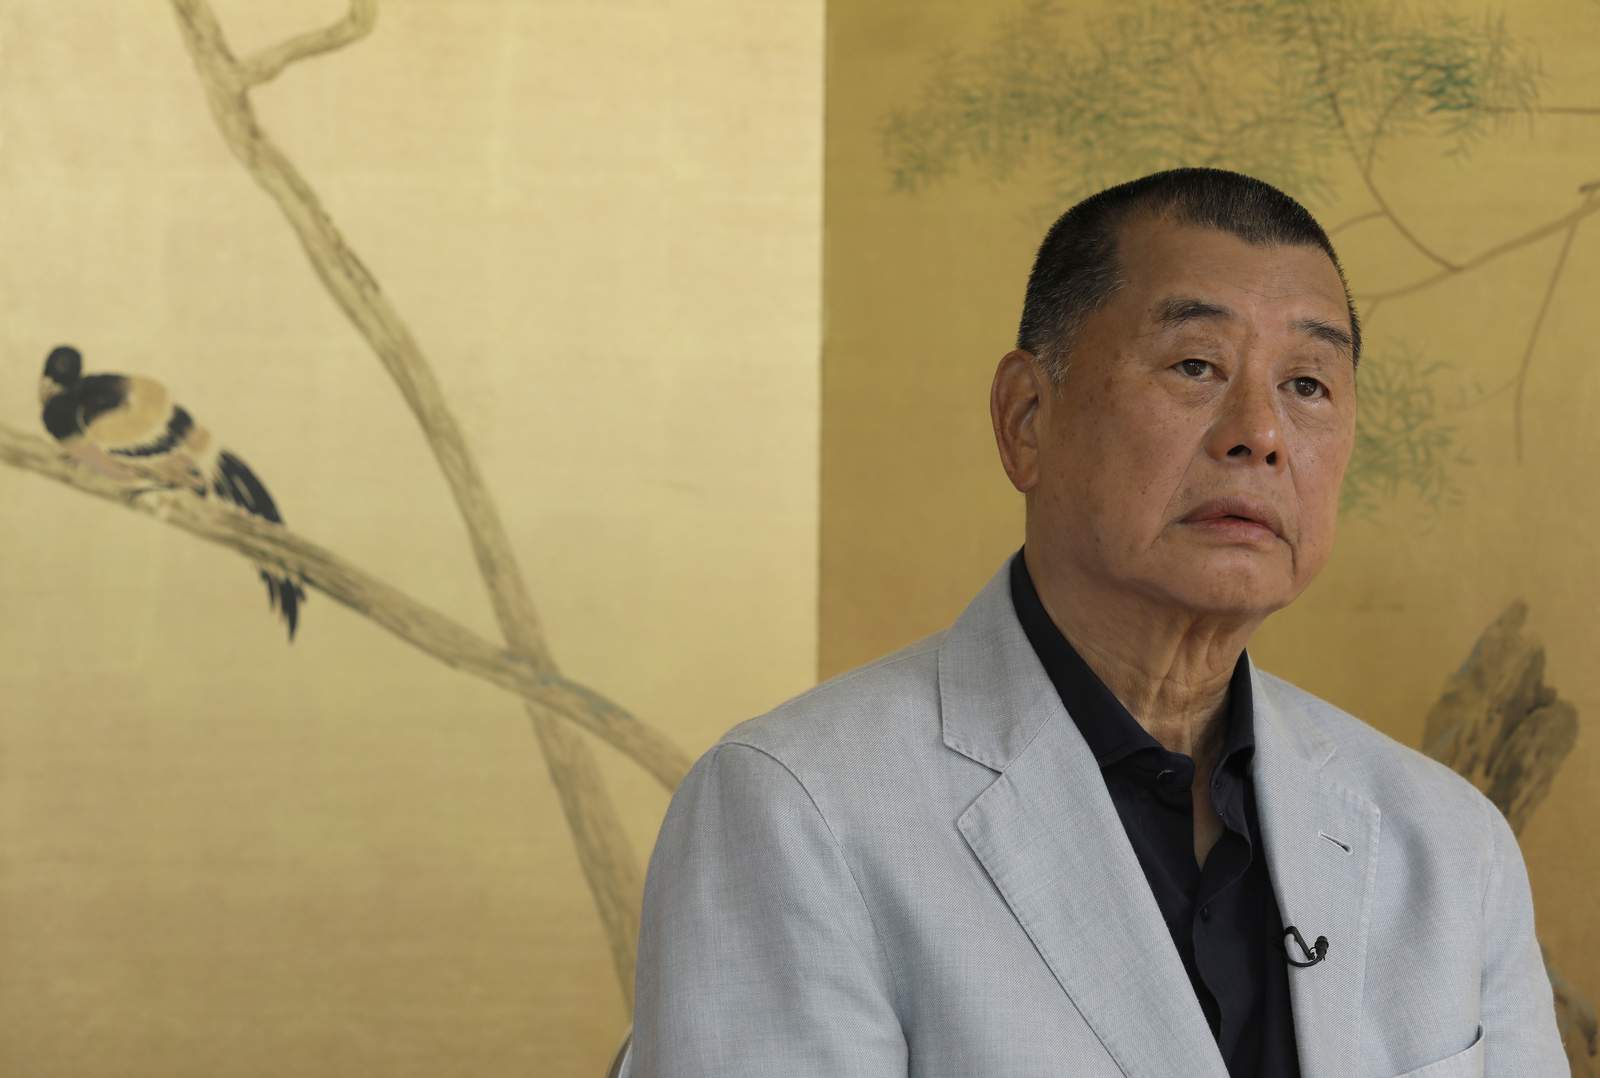 AP Interview: Hong Kong media tycoon says city now 'dead'